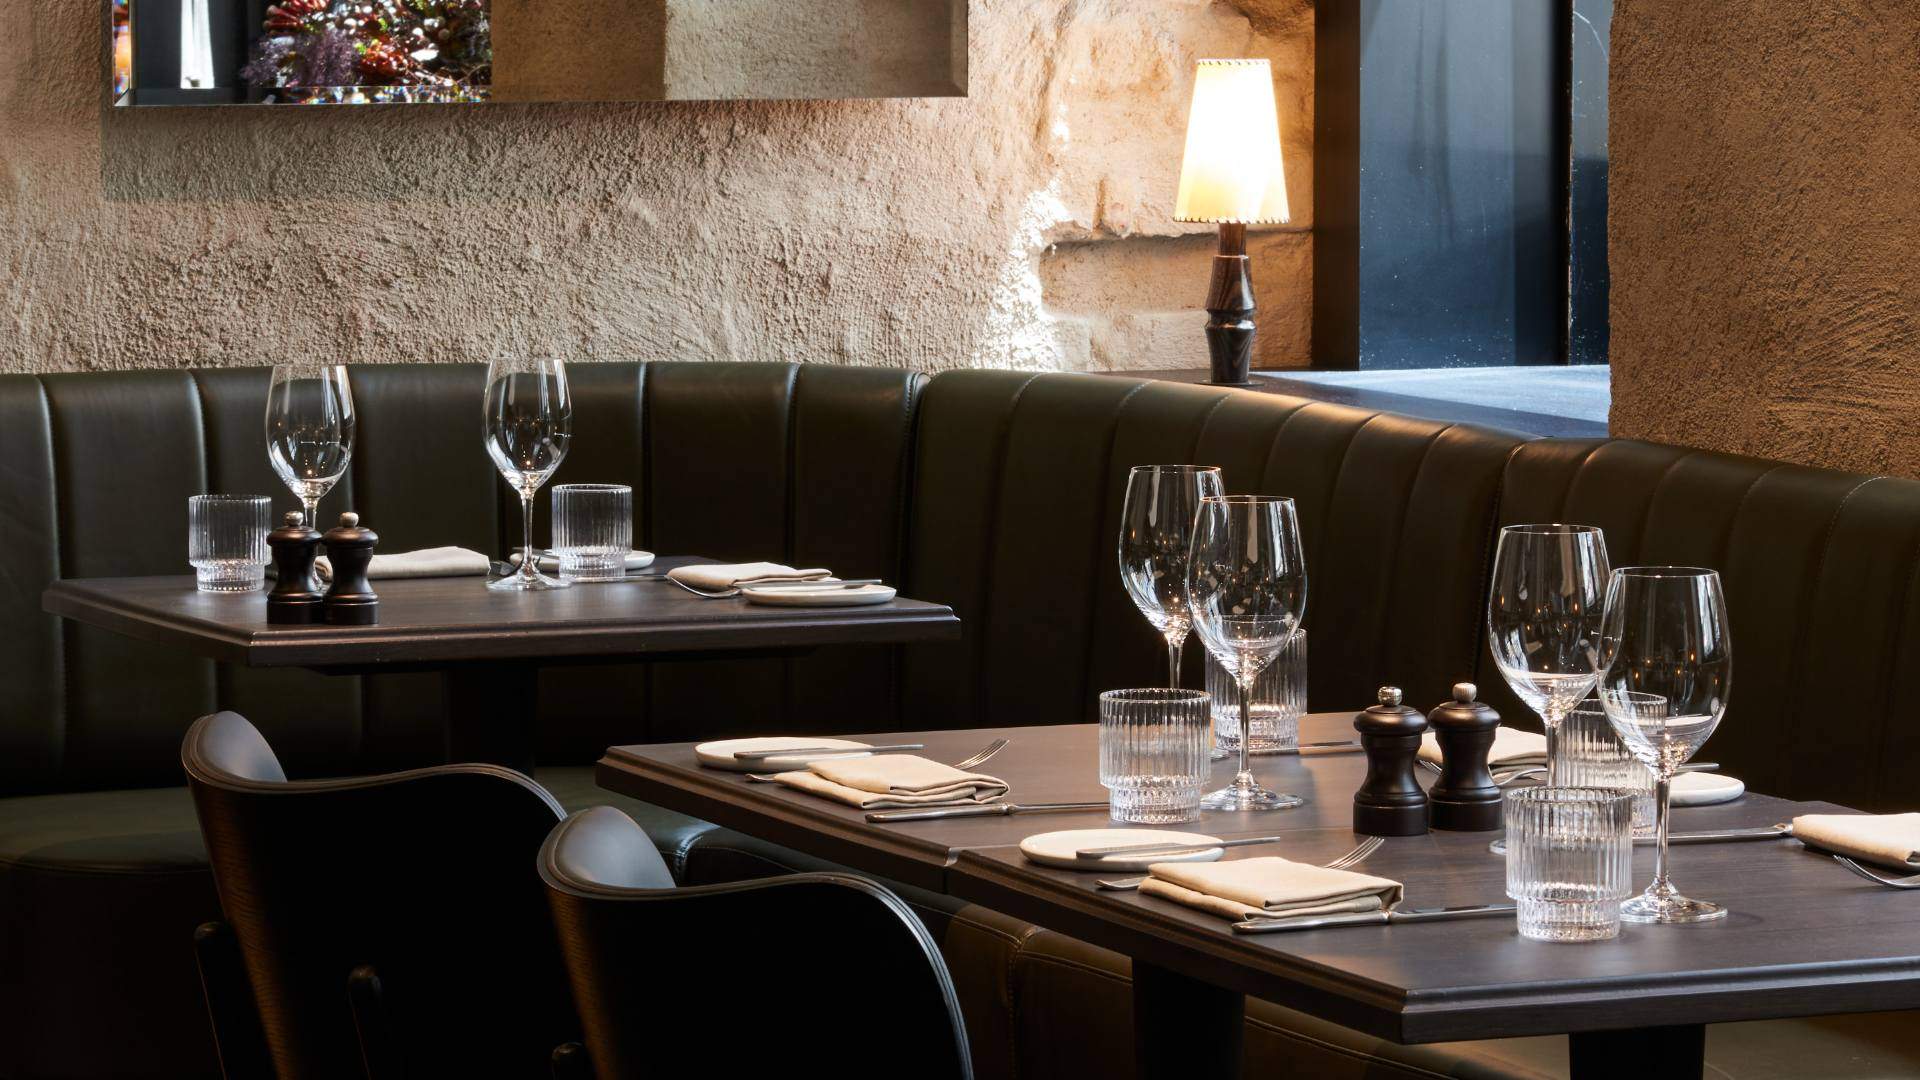 Chancery Lane Is the New Euro-Accented Bistro from Chef Scott Pickett in a Historic CBD Building